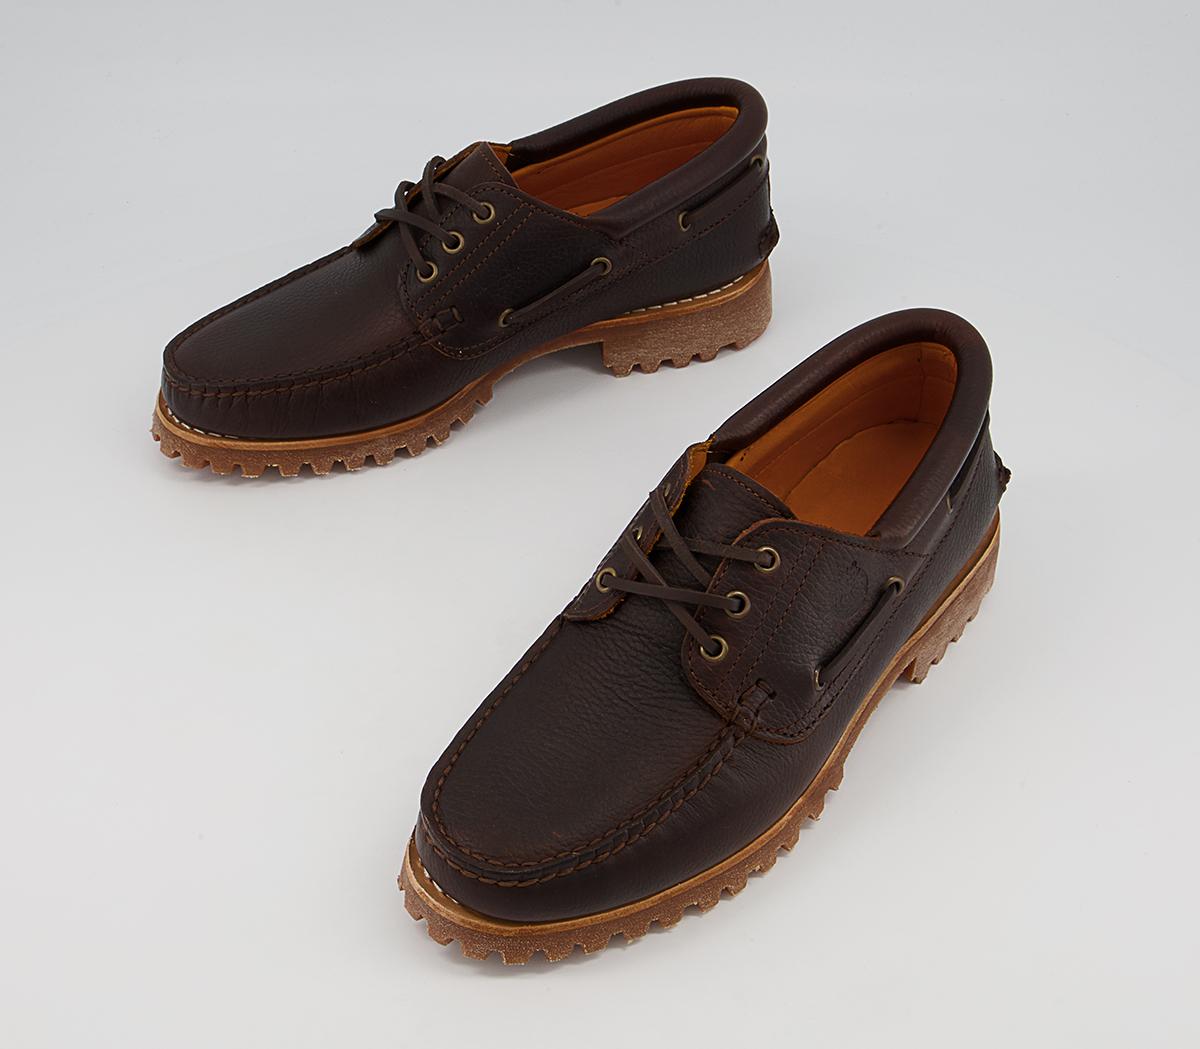 Timberland Authentic 3 Eye Boat Shoes Dark Brown - Boat Shoes